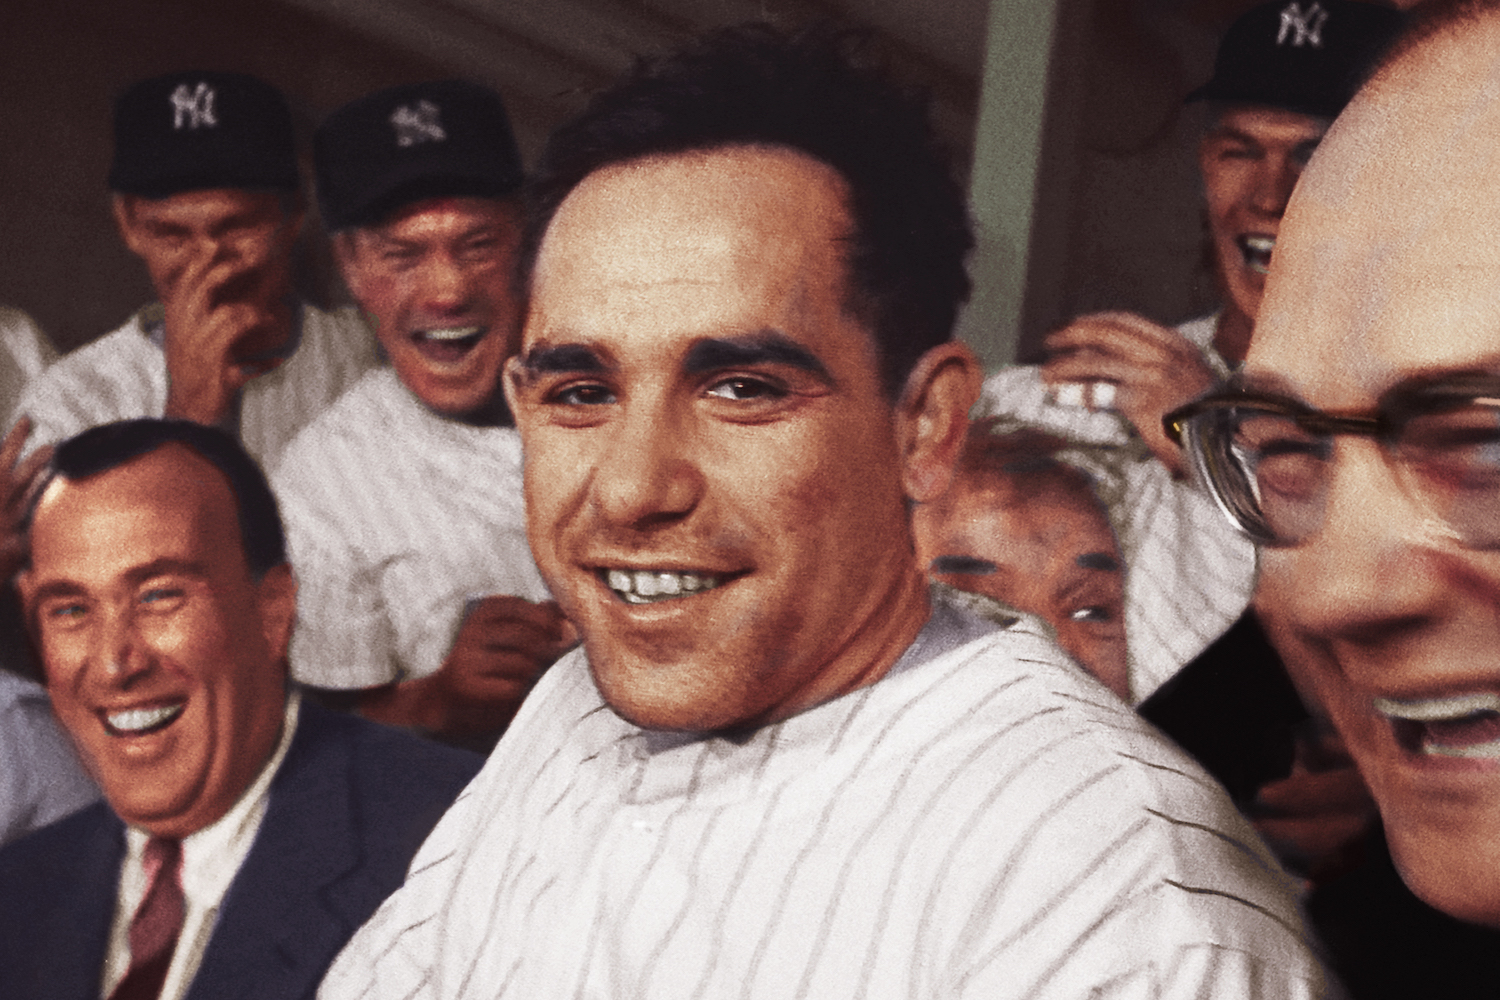 Yogi Berra in his Yankees uniform surrounded by laughing teammates and dapper men in suits during Mr. Berra's playing days